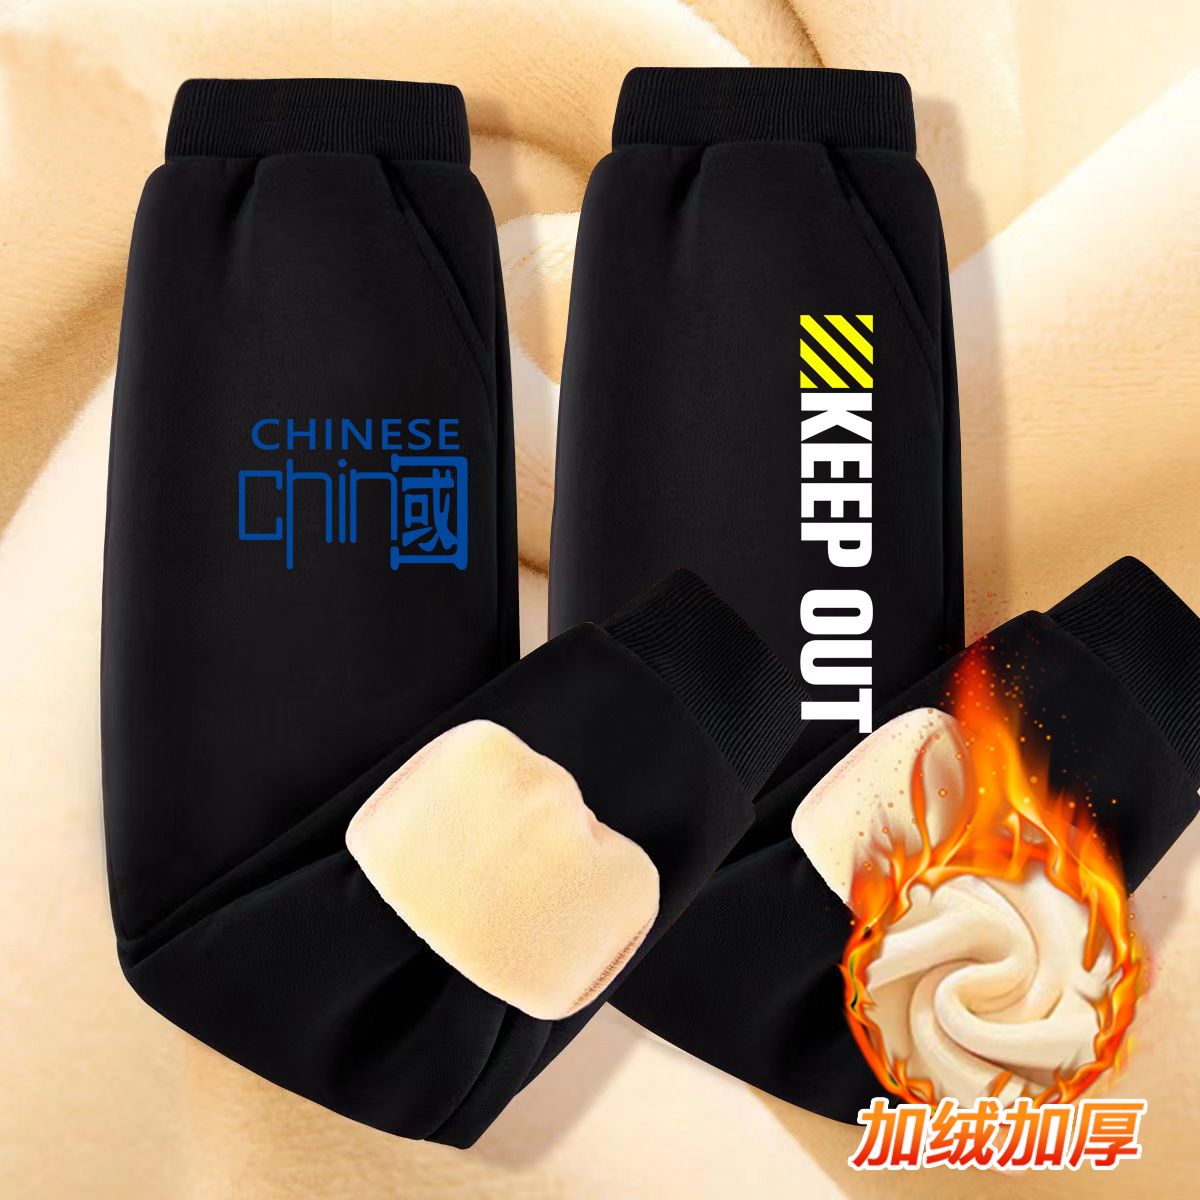 Boys' handsome velvet sweatpants  new cool and handsome warm trousers medium and large children's casual cool and handsome sports pants